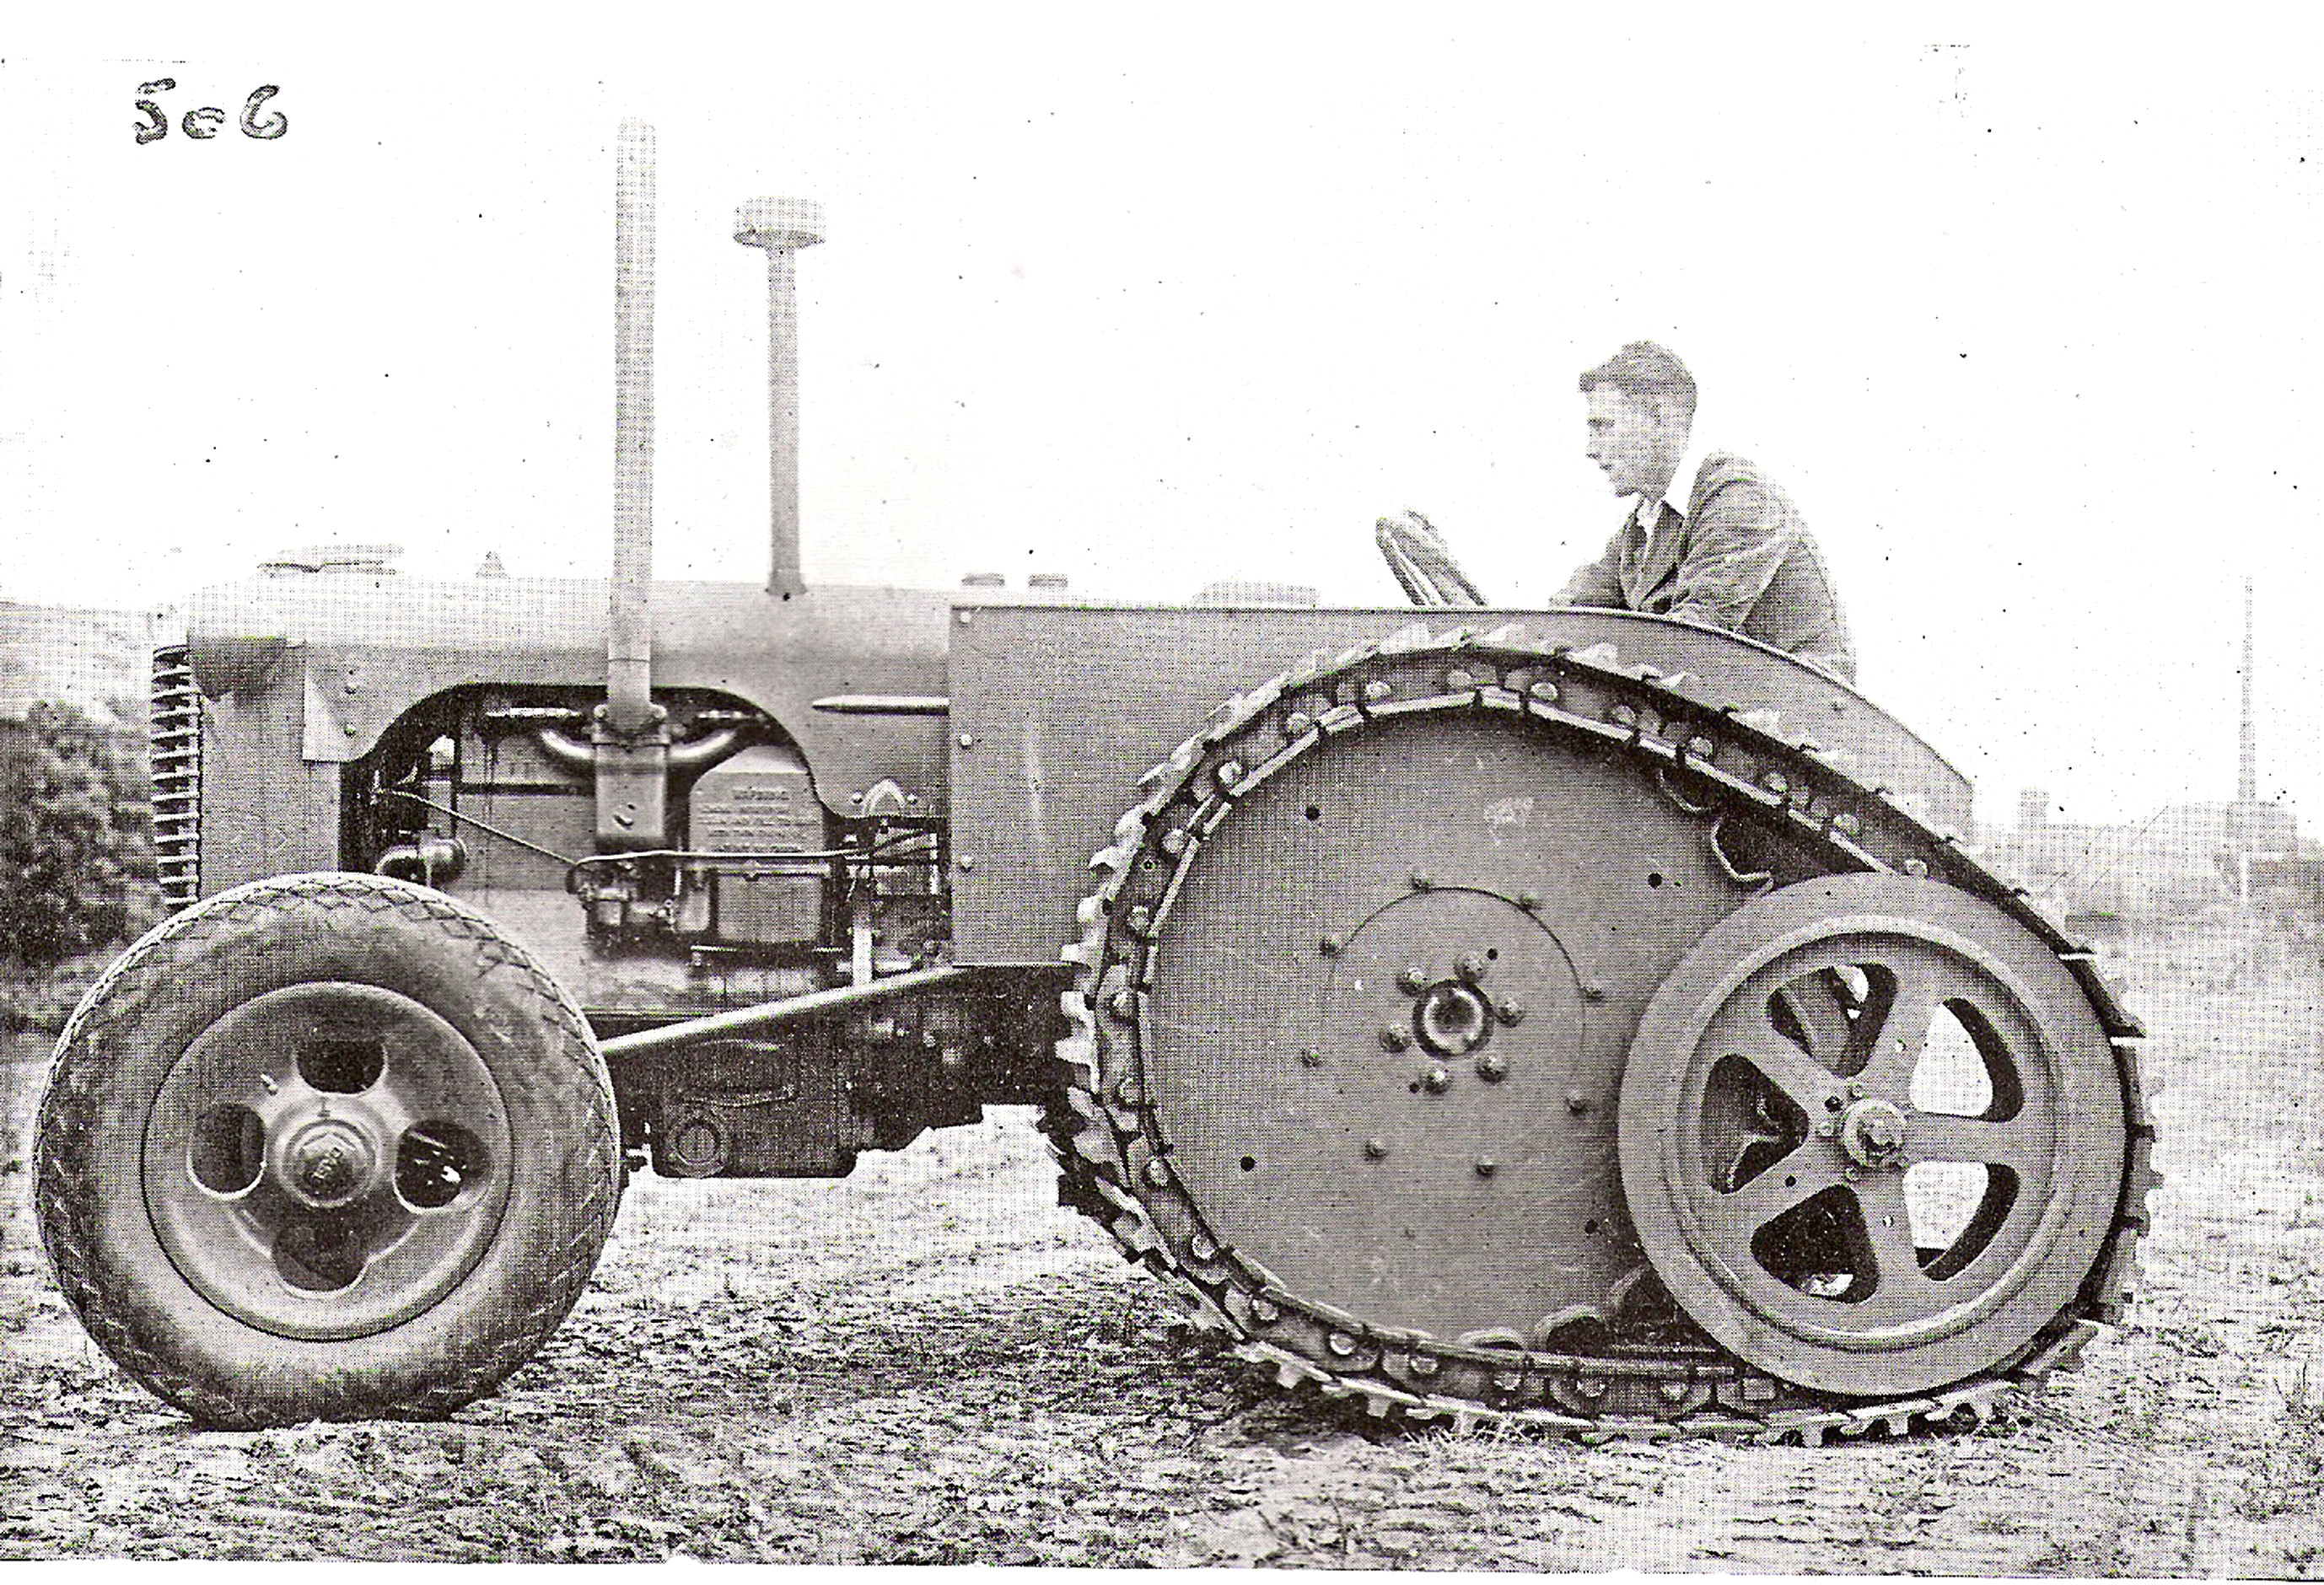 A wartime Case D tractor fitted with Roadless's DG half track system  which gave extra traction in both agricultural and military situations.